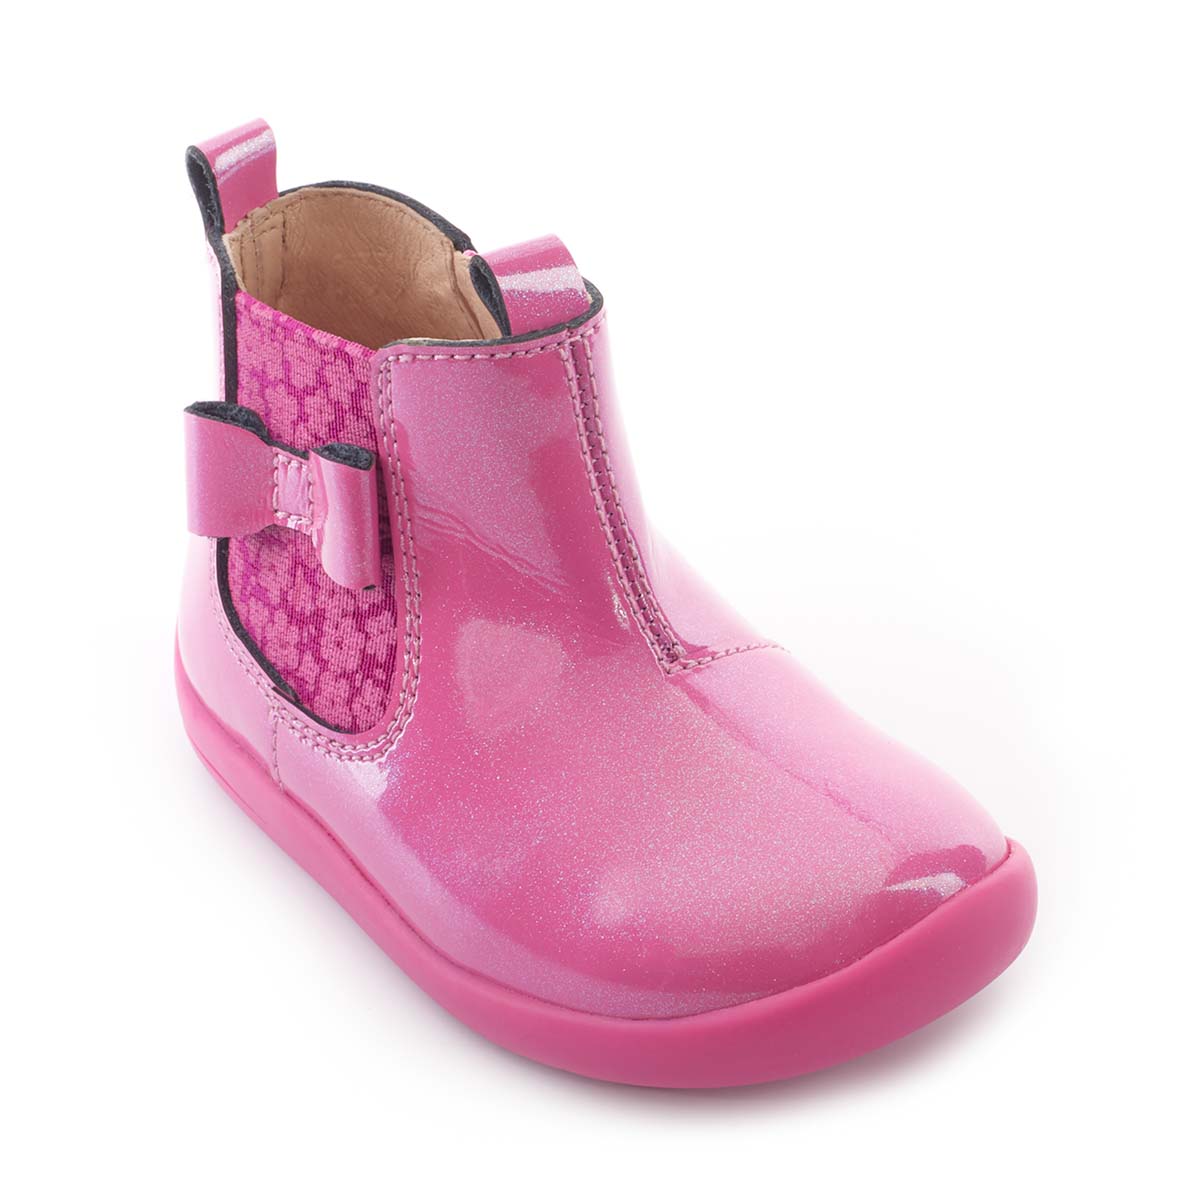 Start Rite Wonderland Chelsea Pink Kids Toddler Girls Boots 0789-16F in a Plain Leather in Size 7